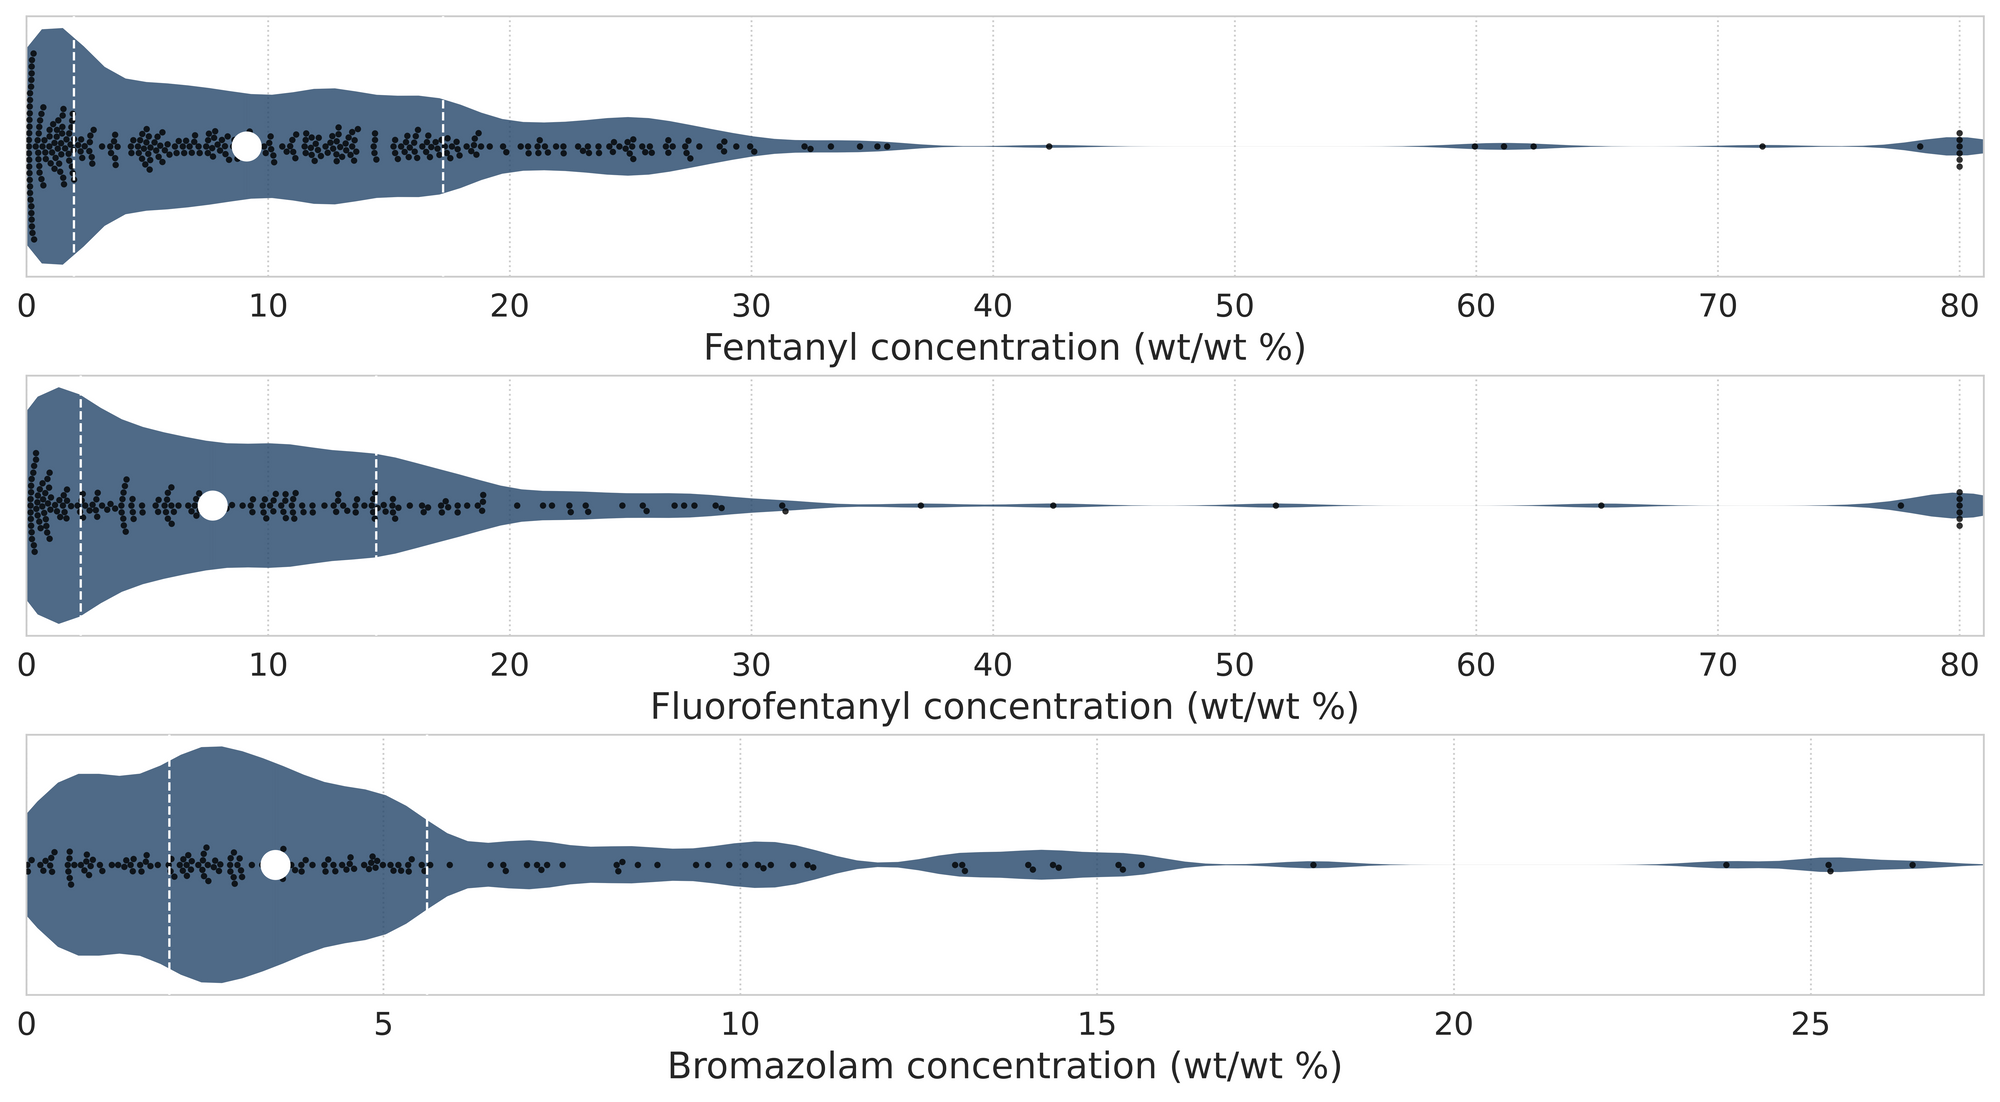 Figure 4. Violin plots of fentanyl (top panel), fluorofentanyl, (middle panel), and bromazolam (bottom) positive samples quantified during July across all collection locations/methods.